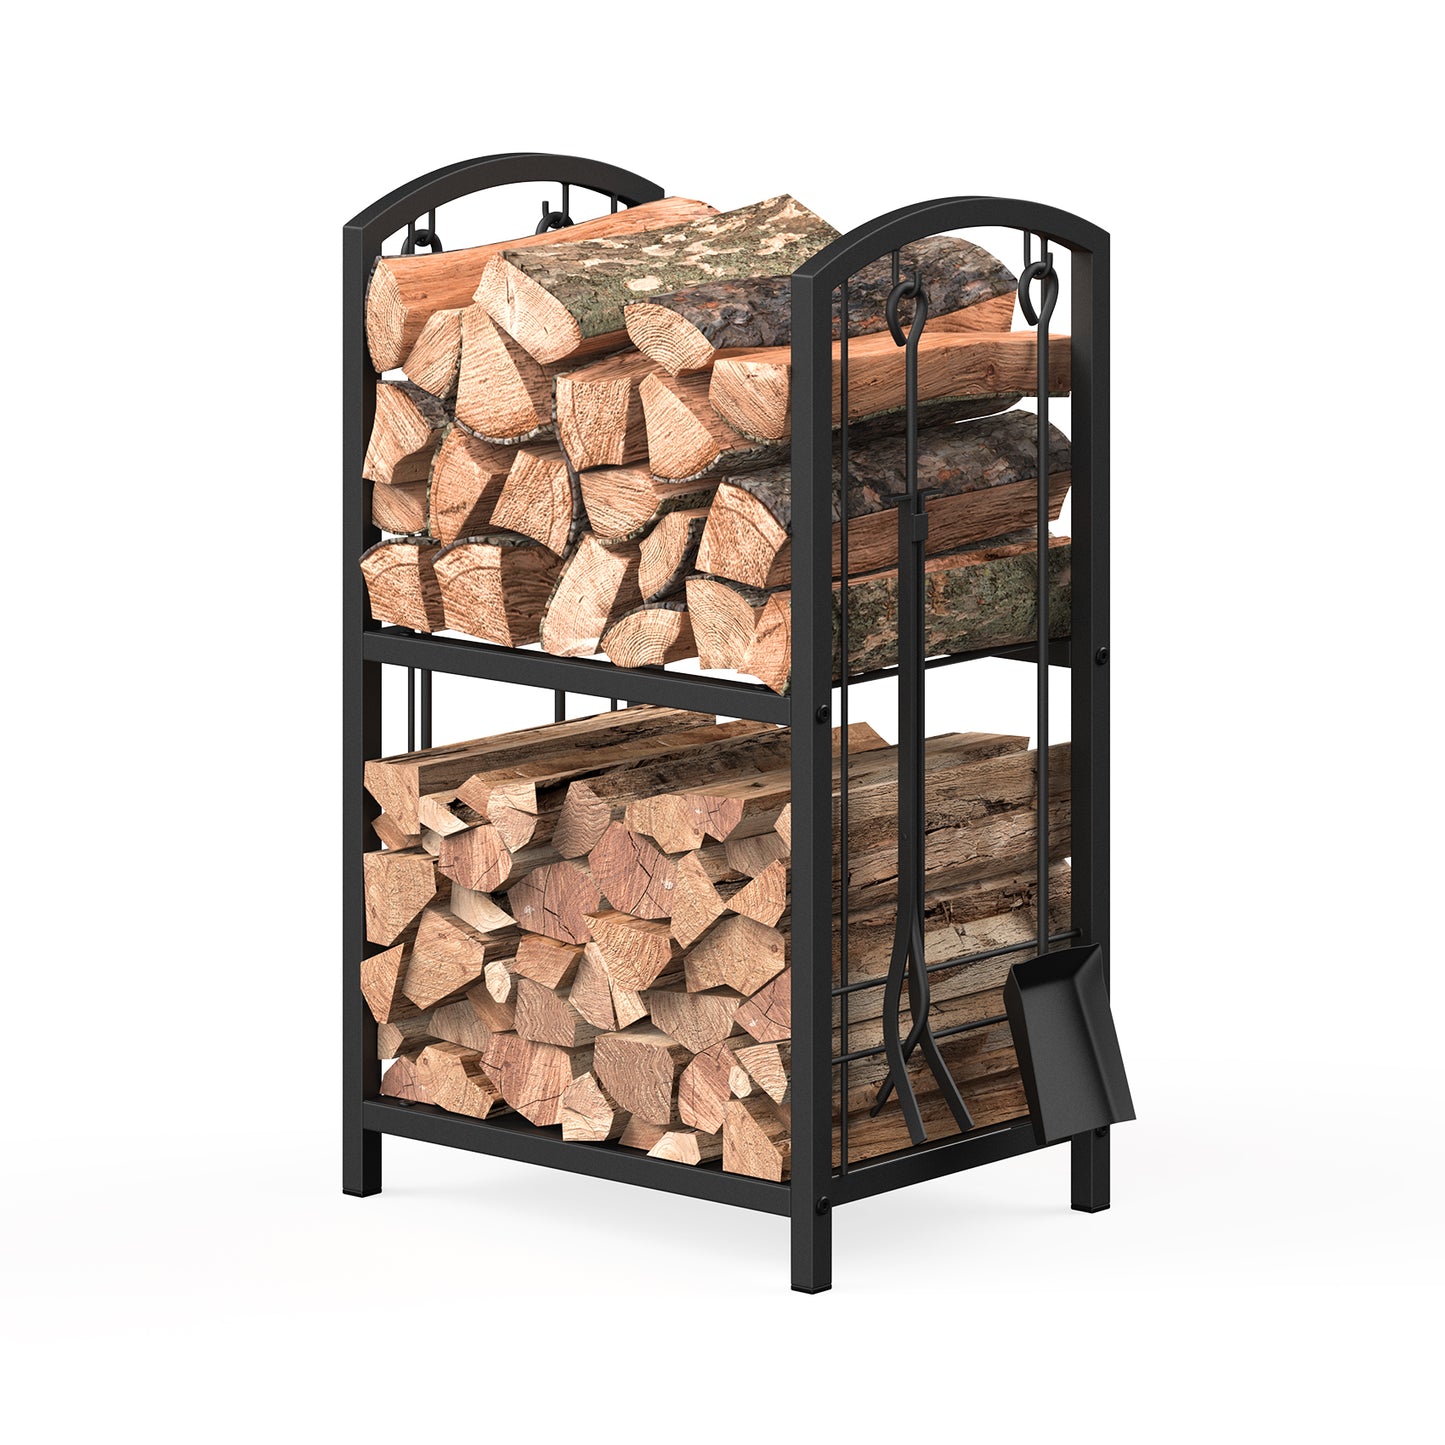 Mr IRONSTONE Firewood Rack with Fireplace Tools set, Fireplace Tool Rack for Indoor Outdoor Fire Log Holder Wrought Iron Large Wood Stove with Firepit Tools, Brush, Shovel, Poker, Tongs, Black